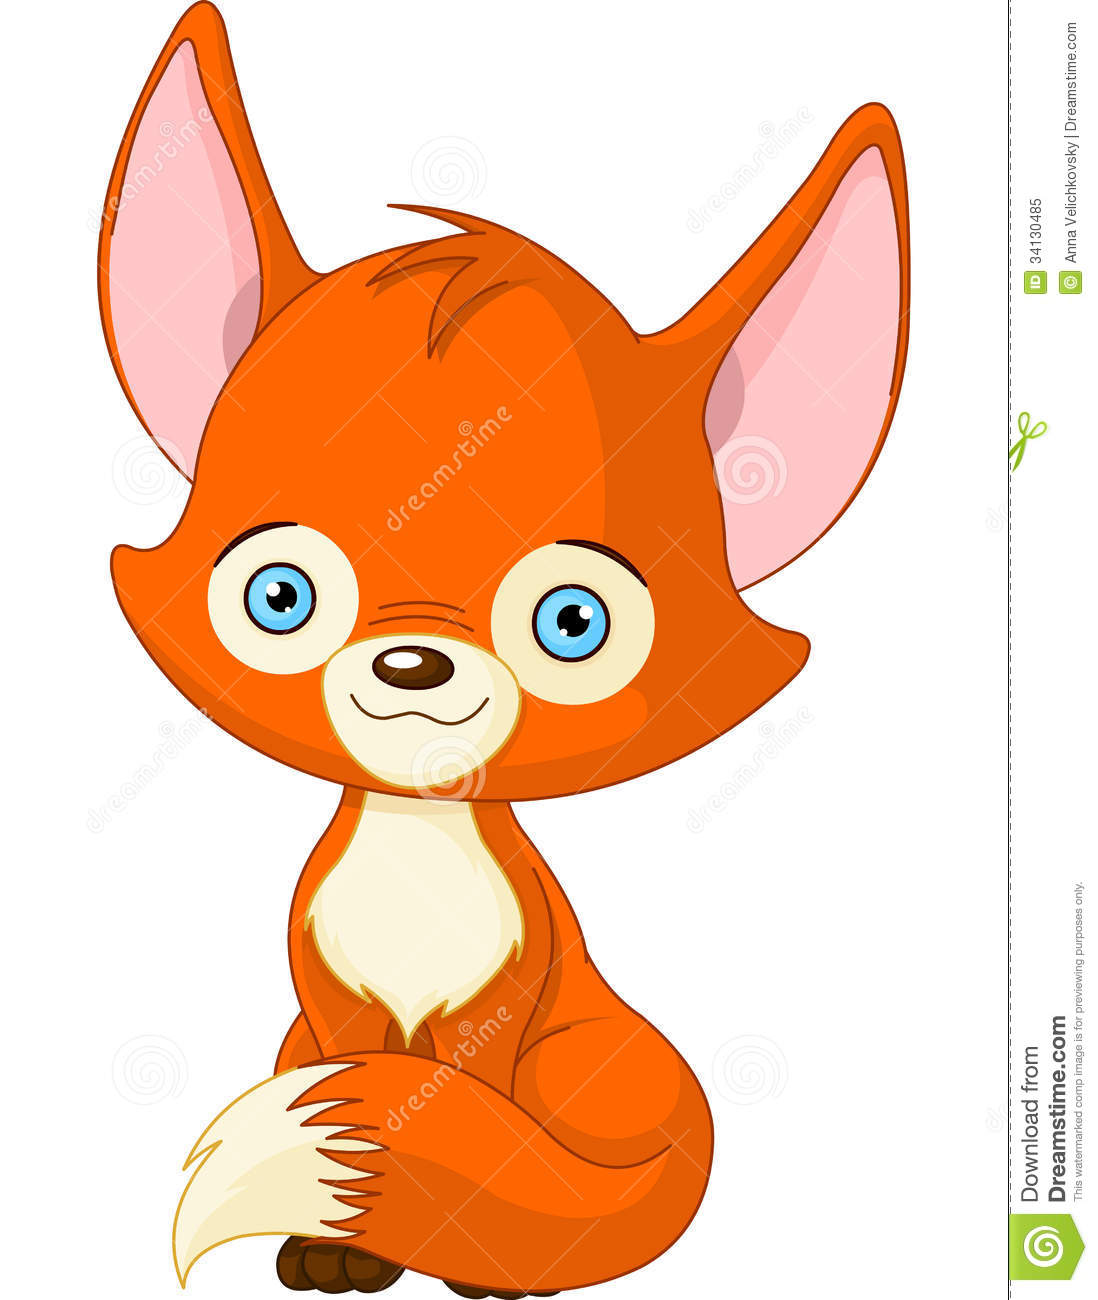 Anime clipart baby fox. Cute panda free images